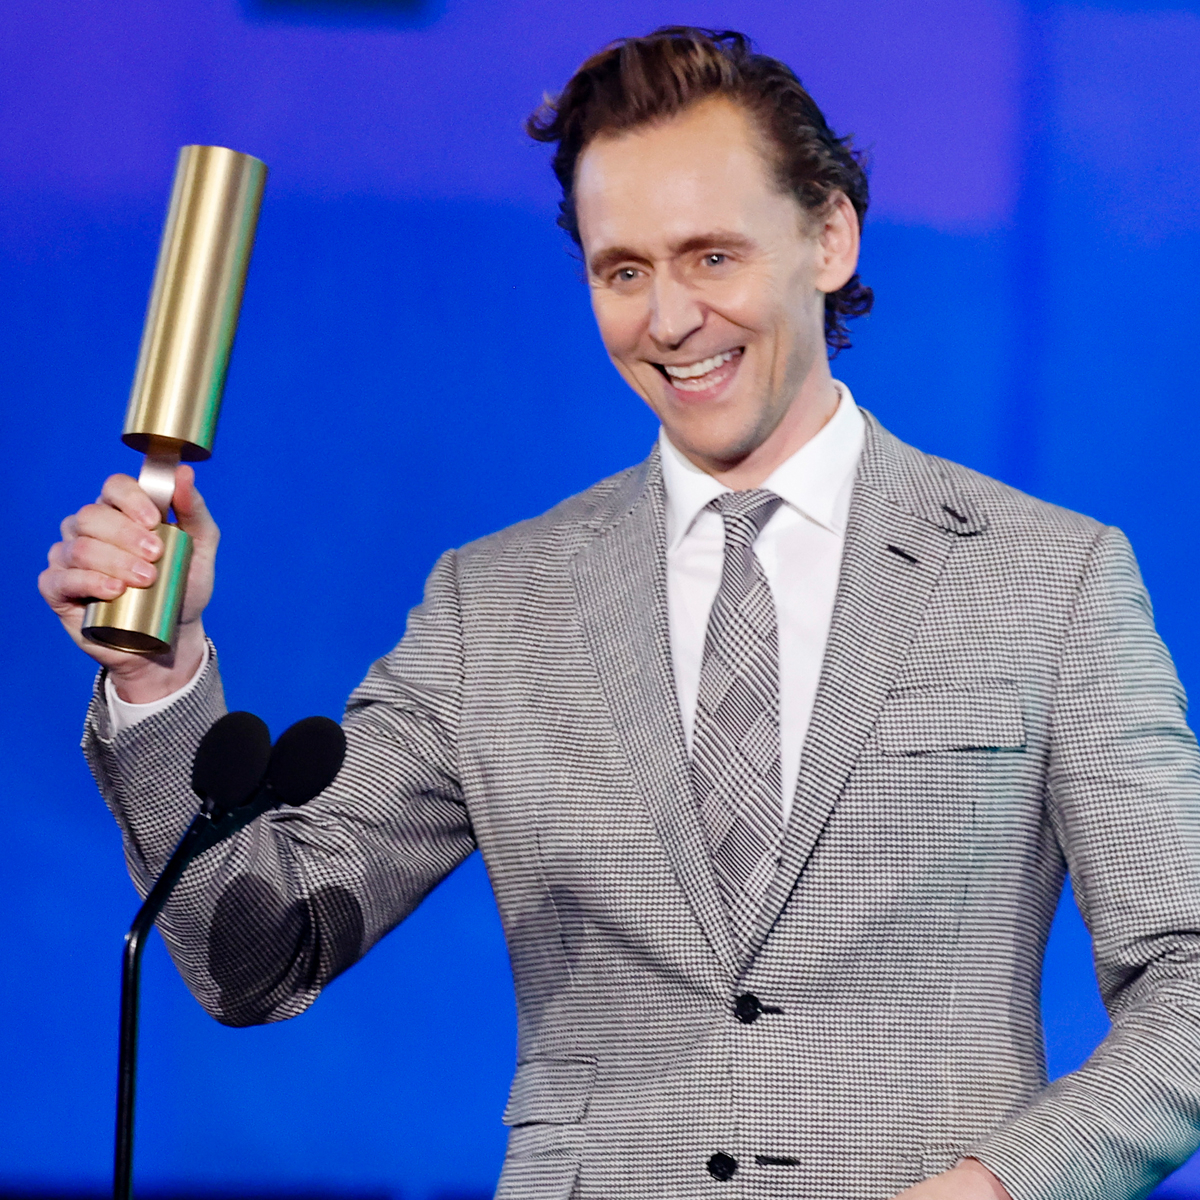 Tom Hiddleston Gives Rare—and Swoon-Worthy—Shoutout to Fiancée Zawe Ashton at People's Choice Awards